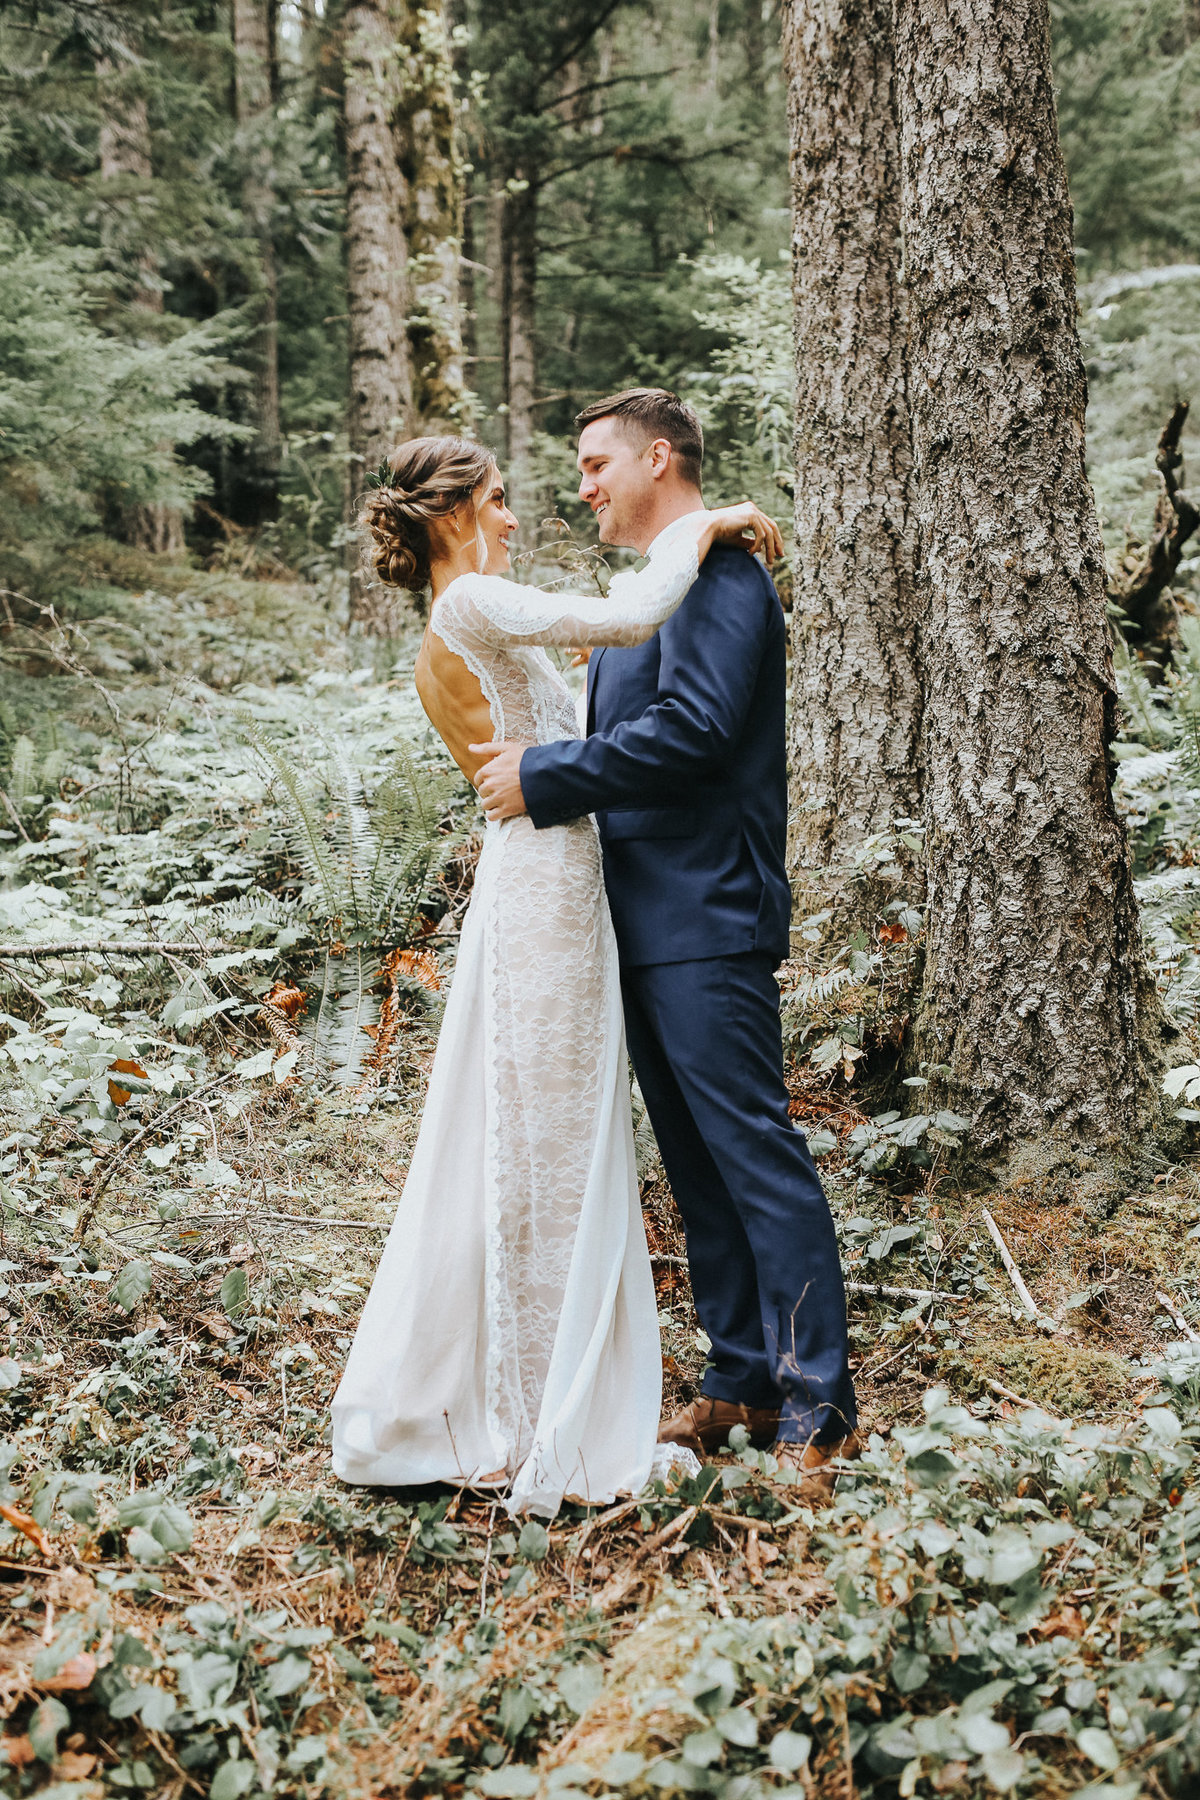 First look with bride and groom in the woods of Port Angeles, Washington